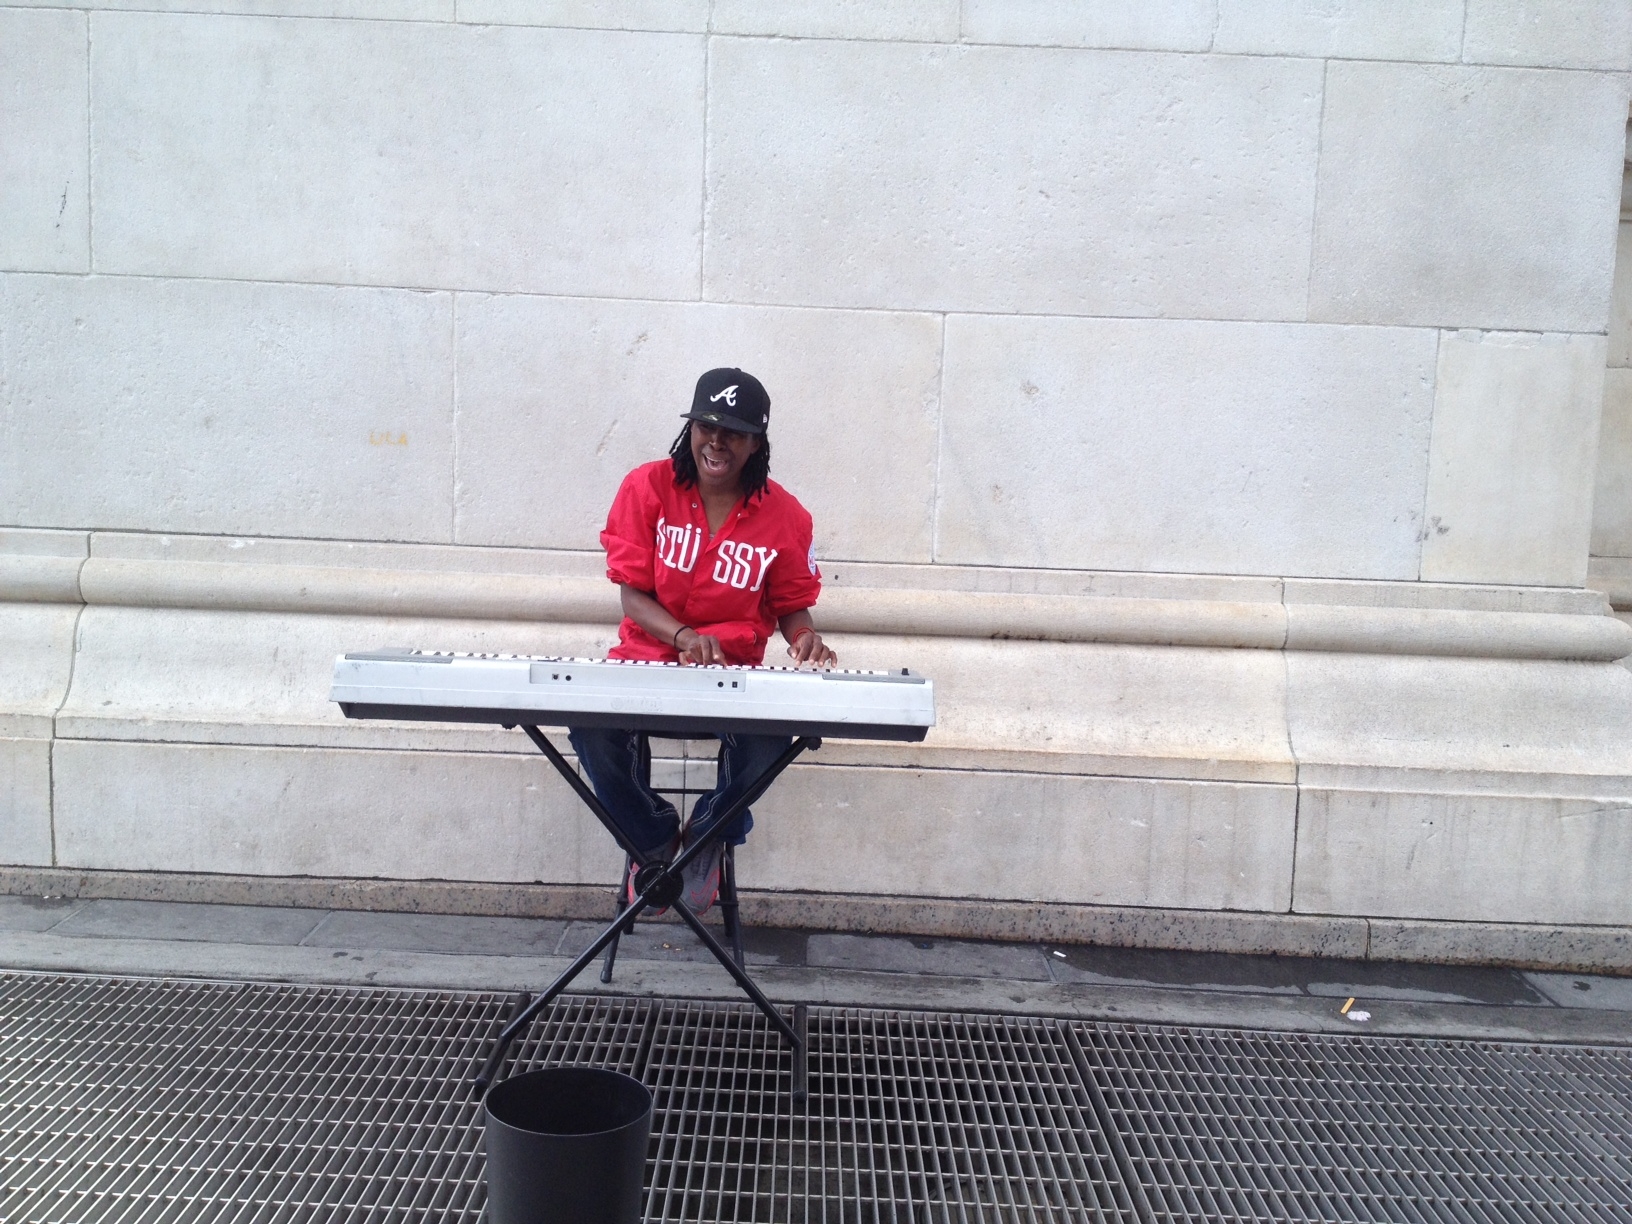 street musician: the location, the red sweatshirt, the keyboard, the ...